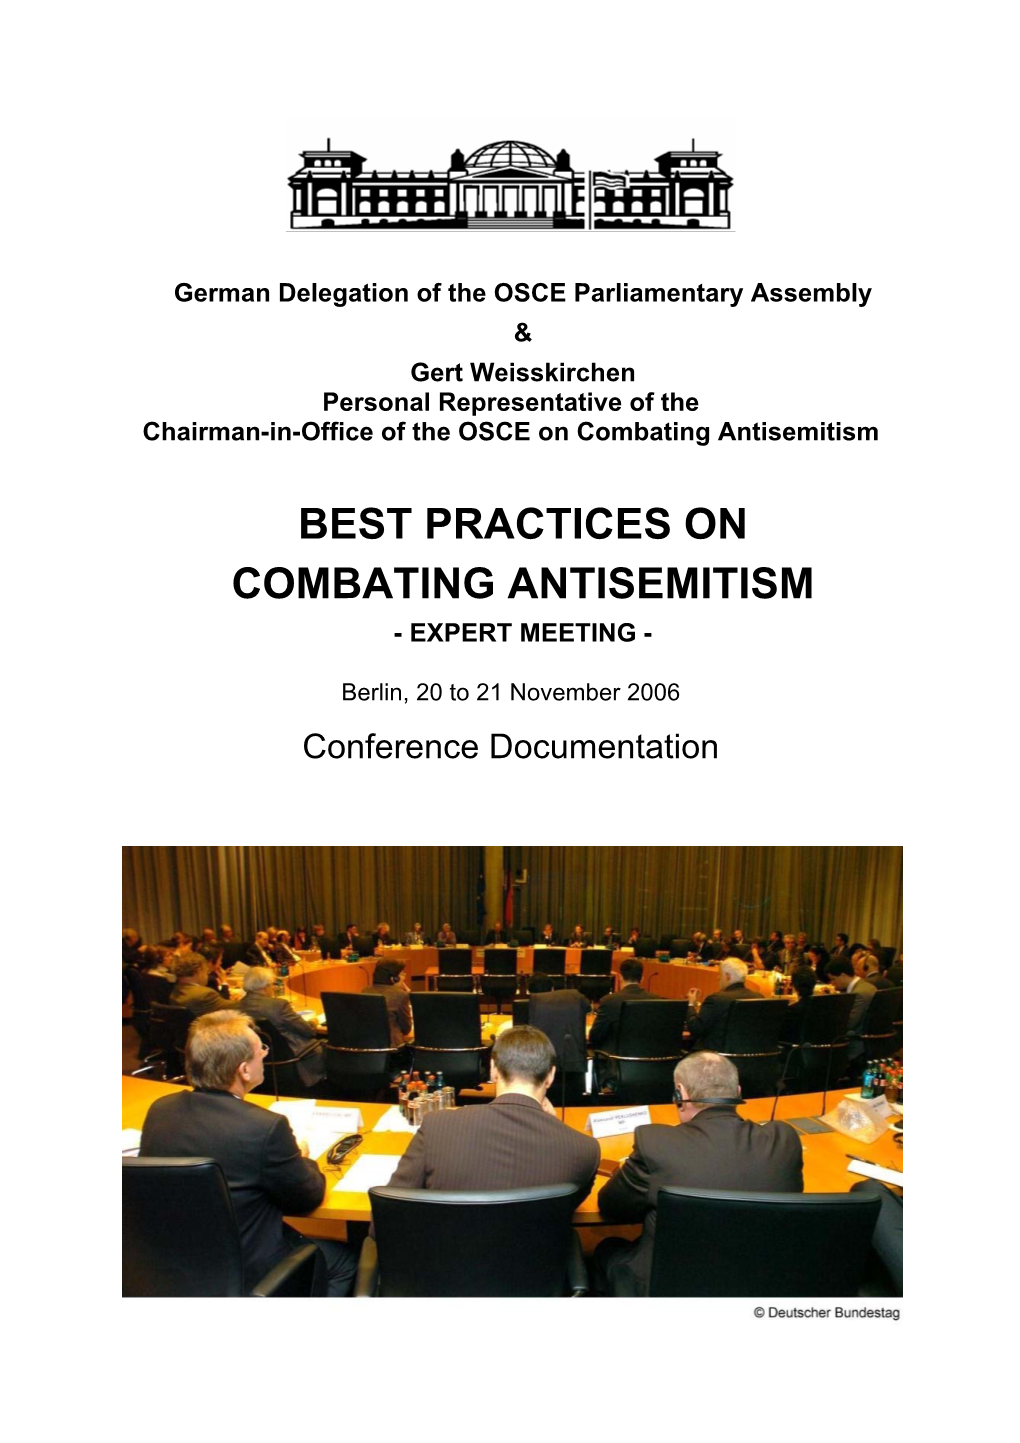 Best Practices on Combating Antisemitism 1